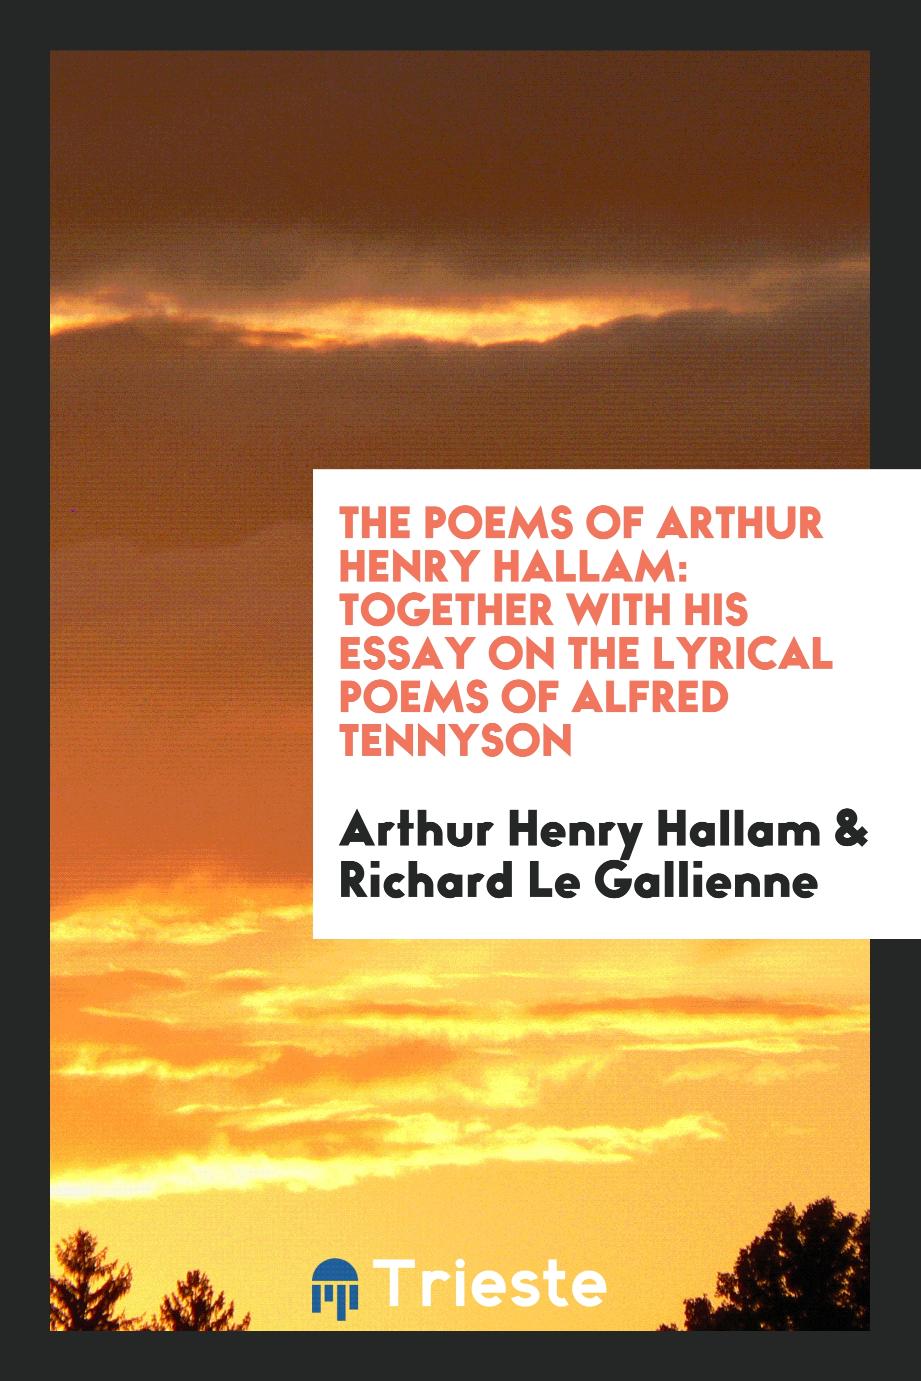 The poems of Arthur Henry Hallam: together with his essay on the lyrical poems of Alfred Tennyson